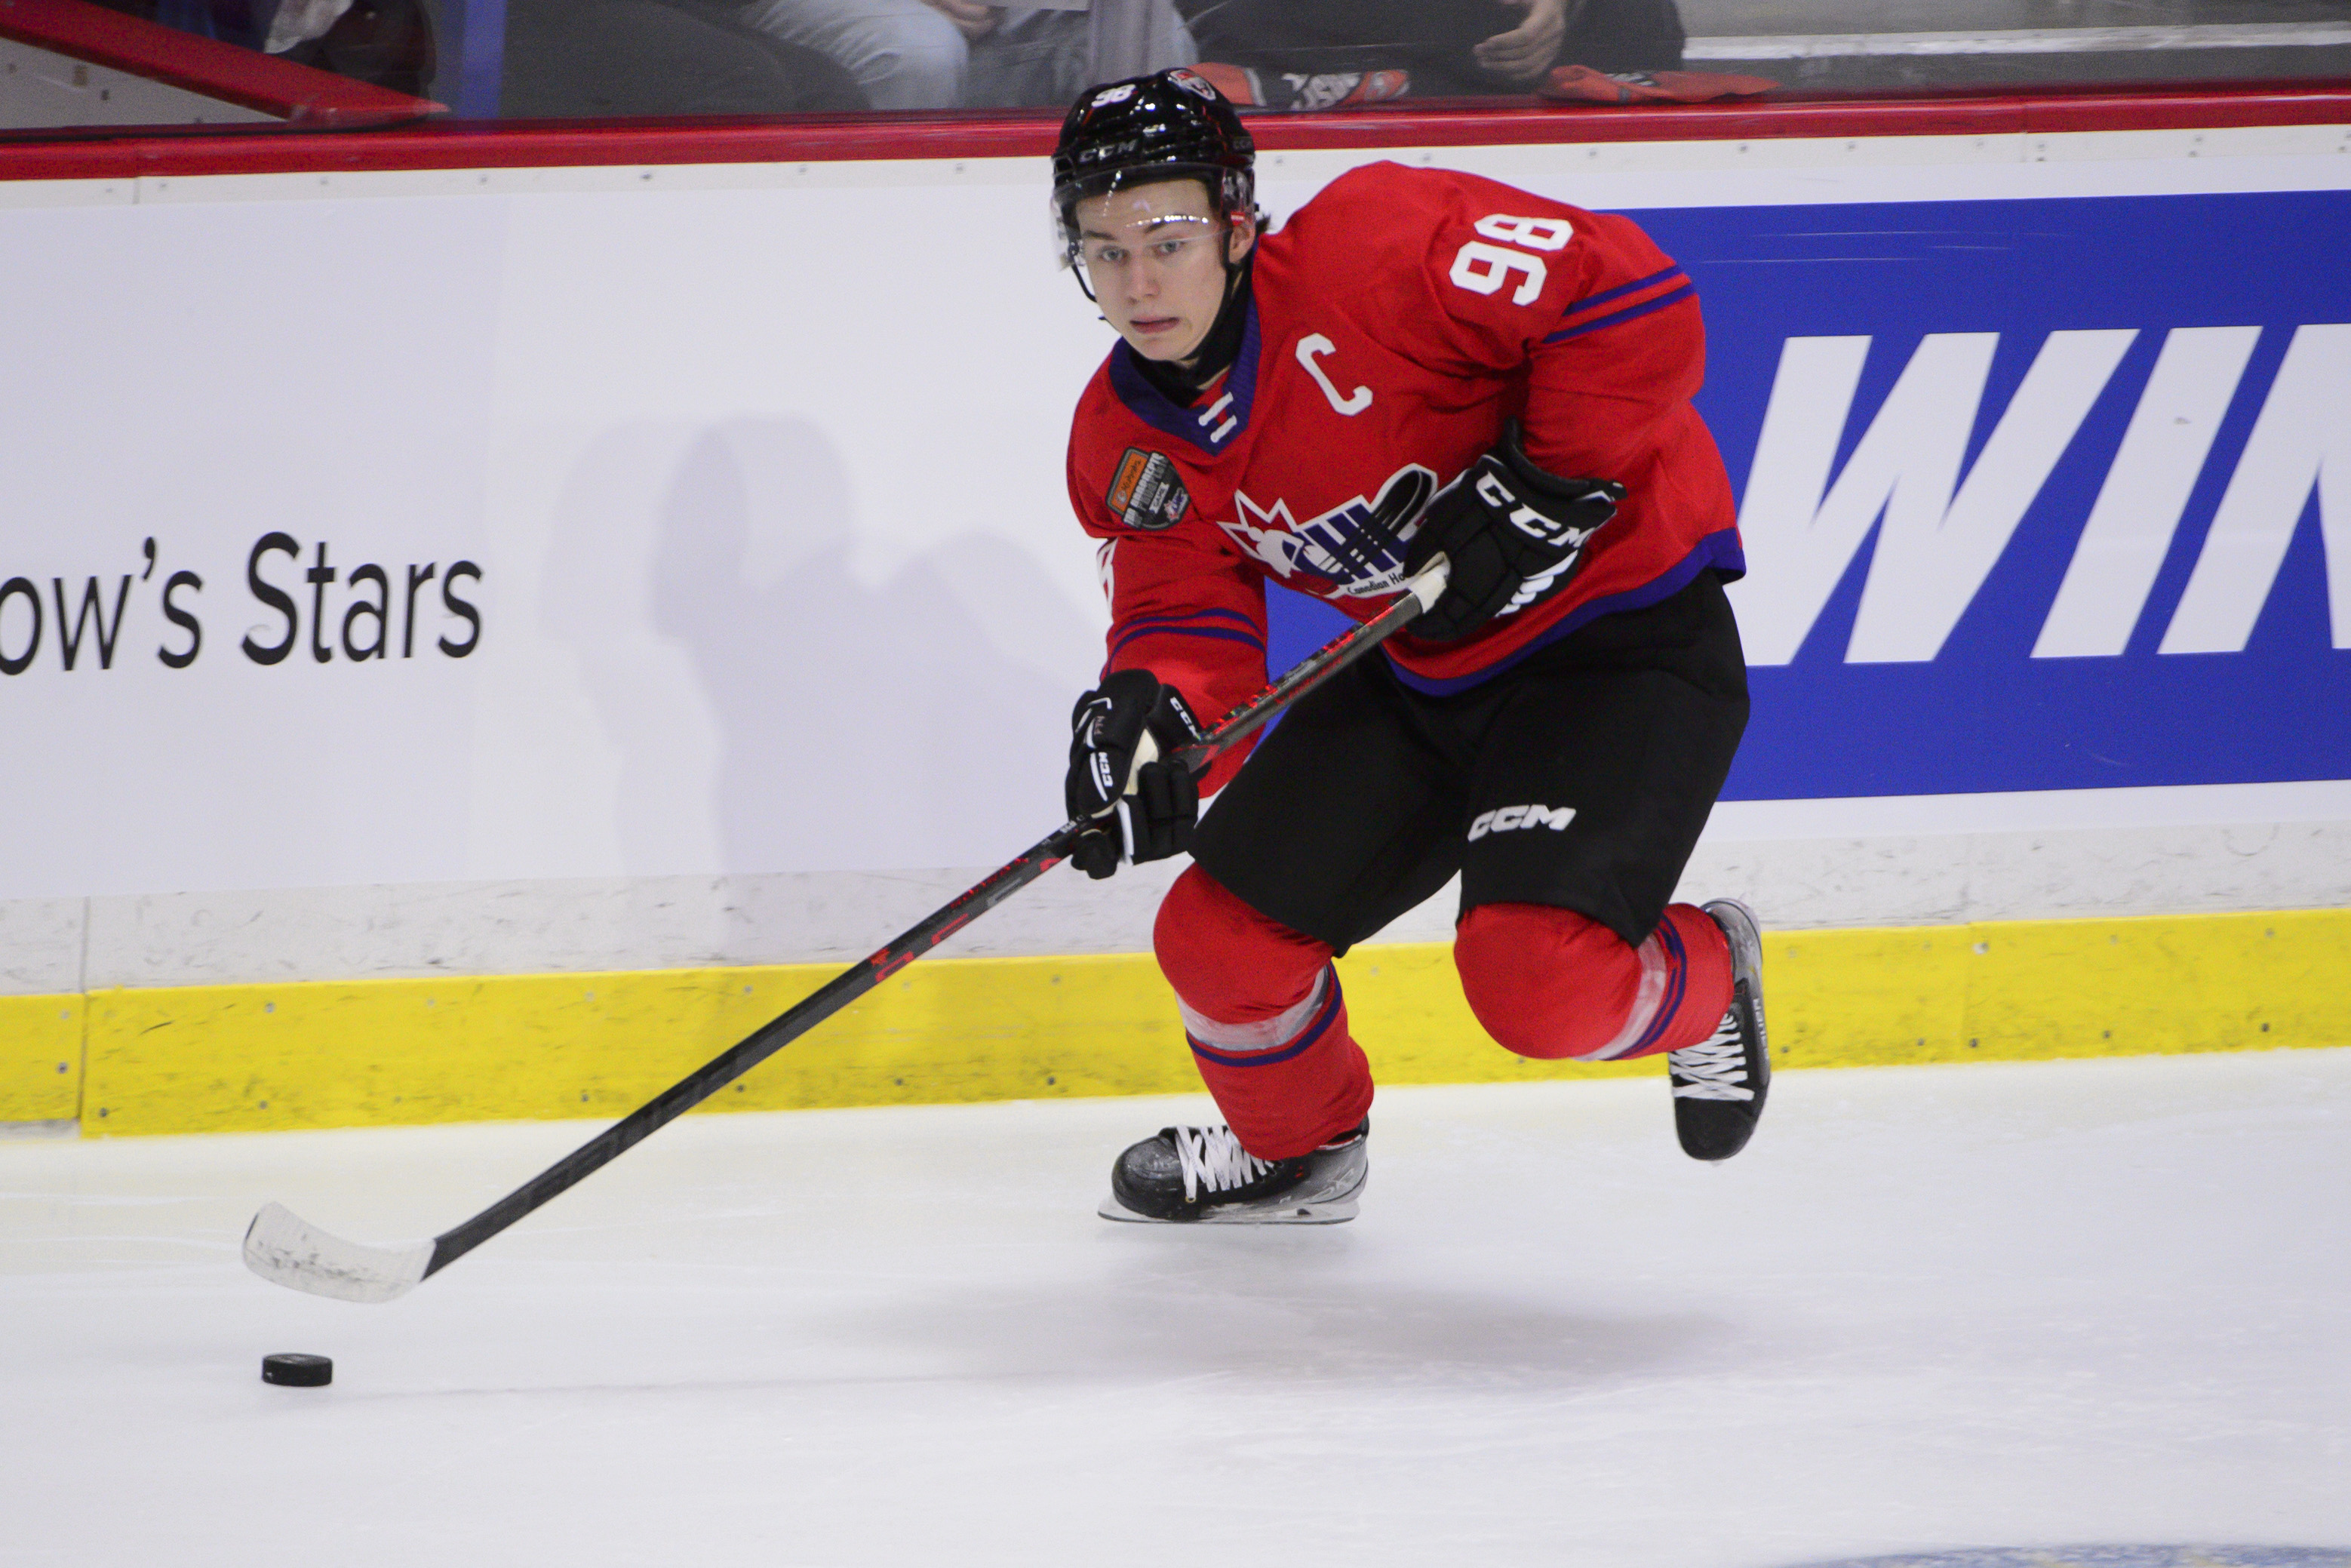 Hockey: CHL Top Prospects Game